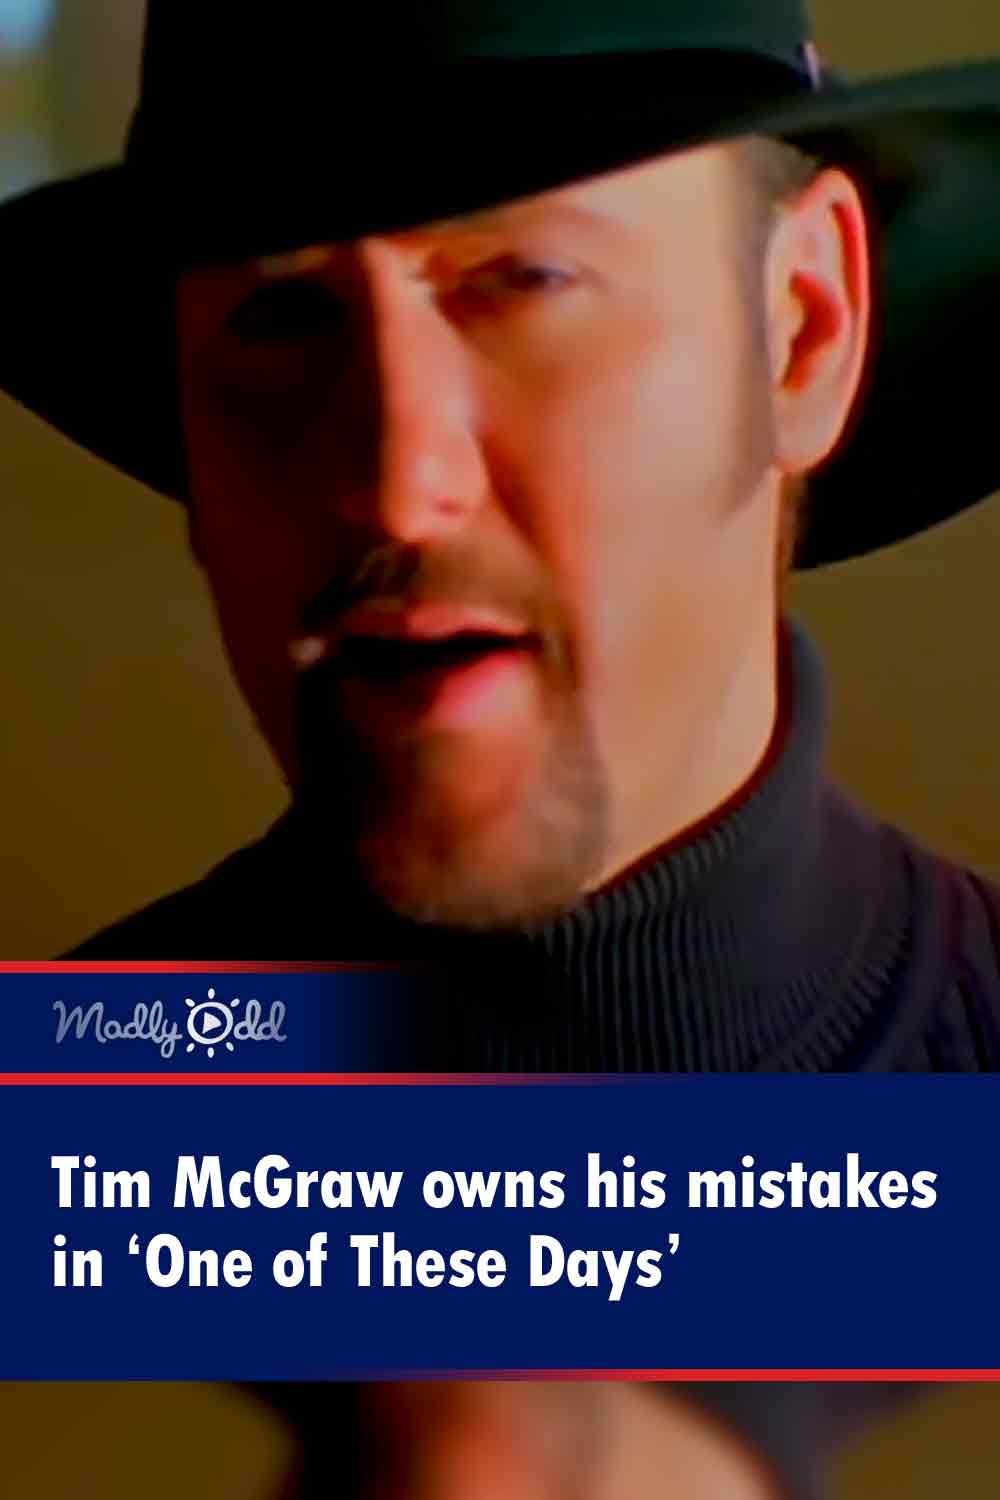 Tim McGraw owns his mistakes in ‘One of These Days’